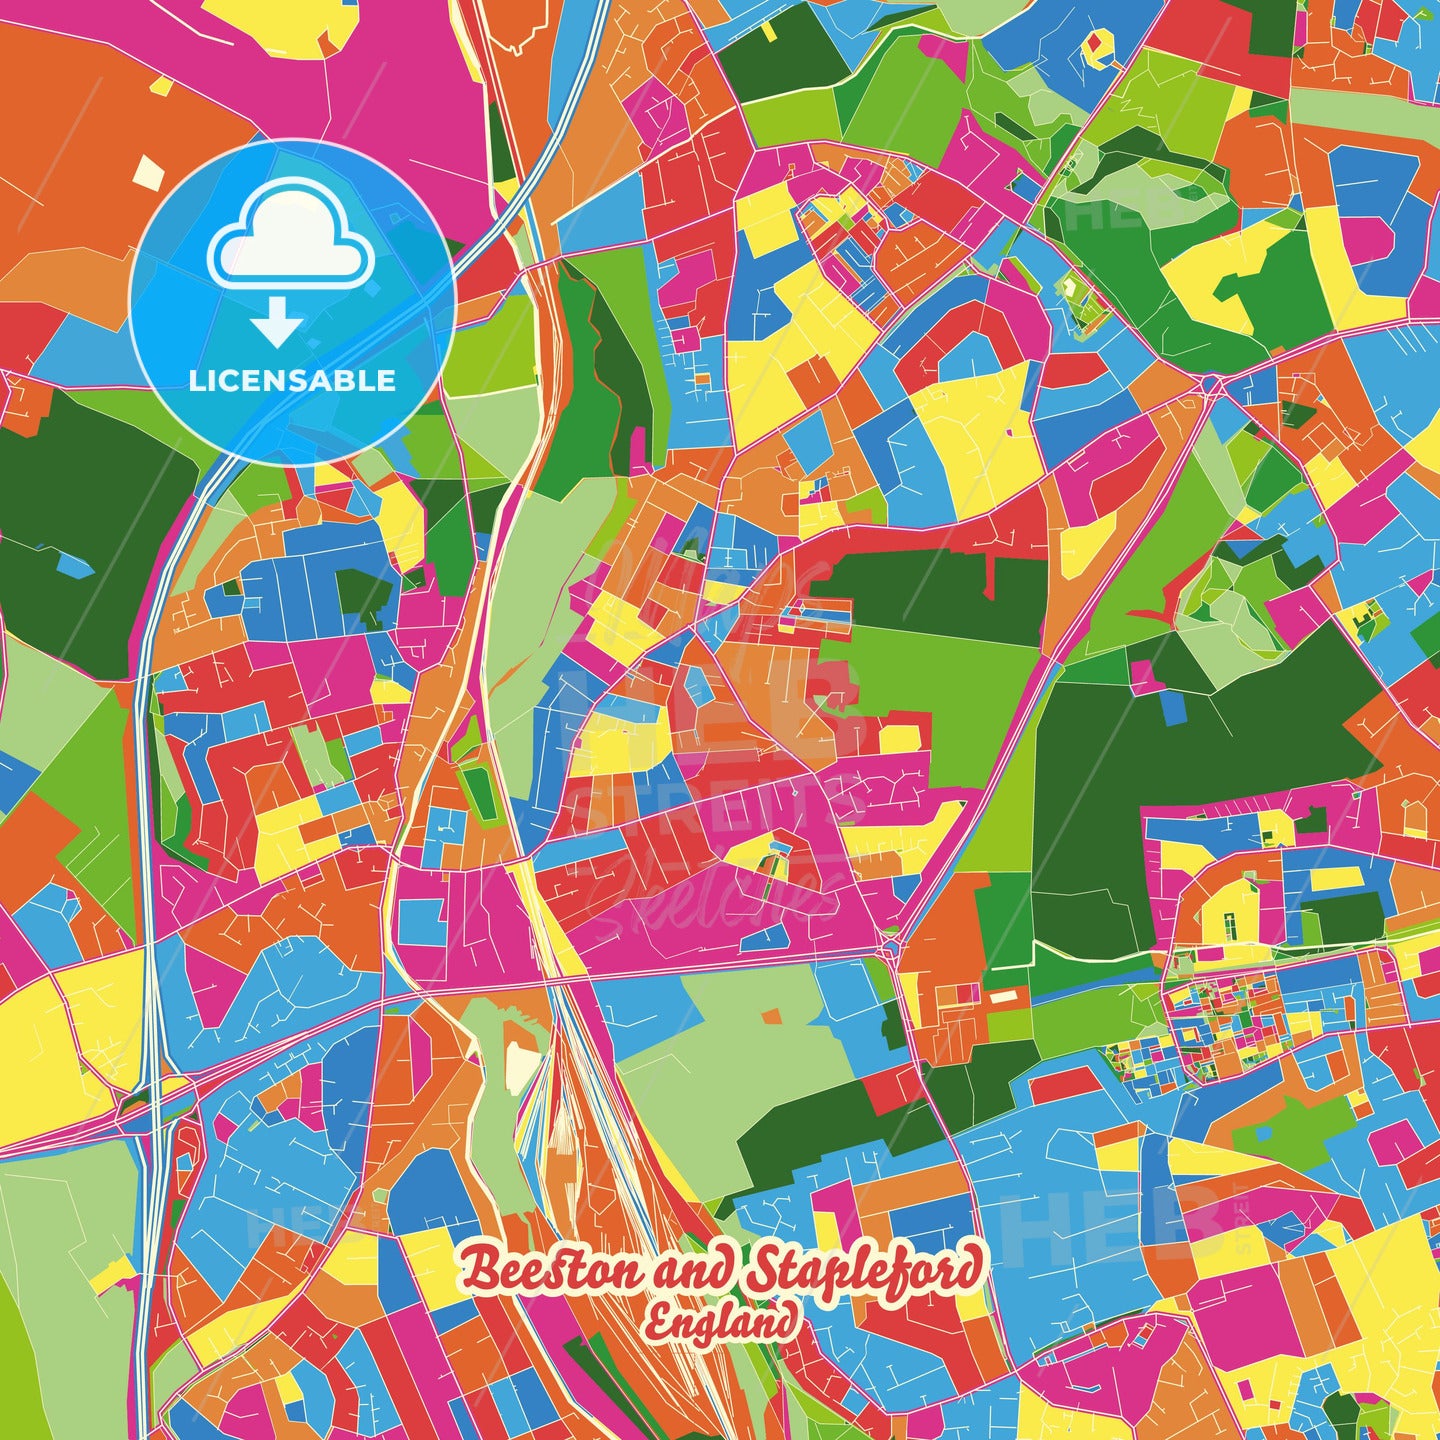 Beeston and Stapleford, England Crazy Colorful Street Map Poster Template - HEBSTREITS Sketches